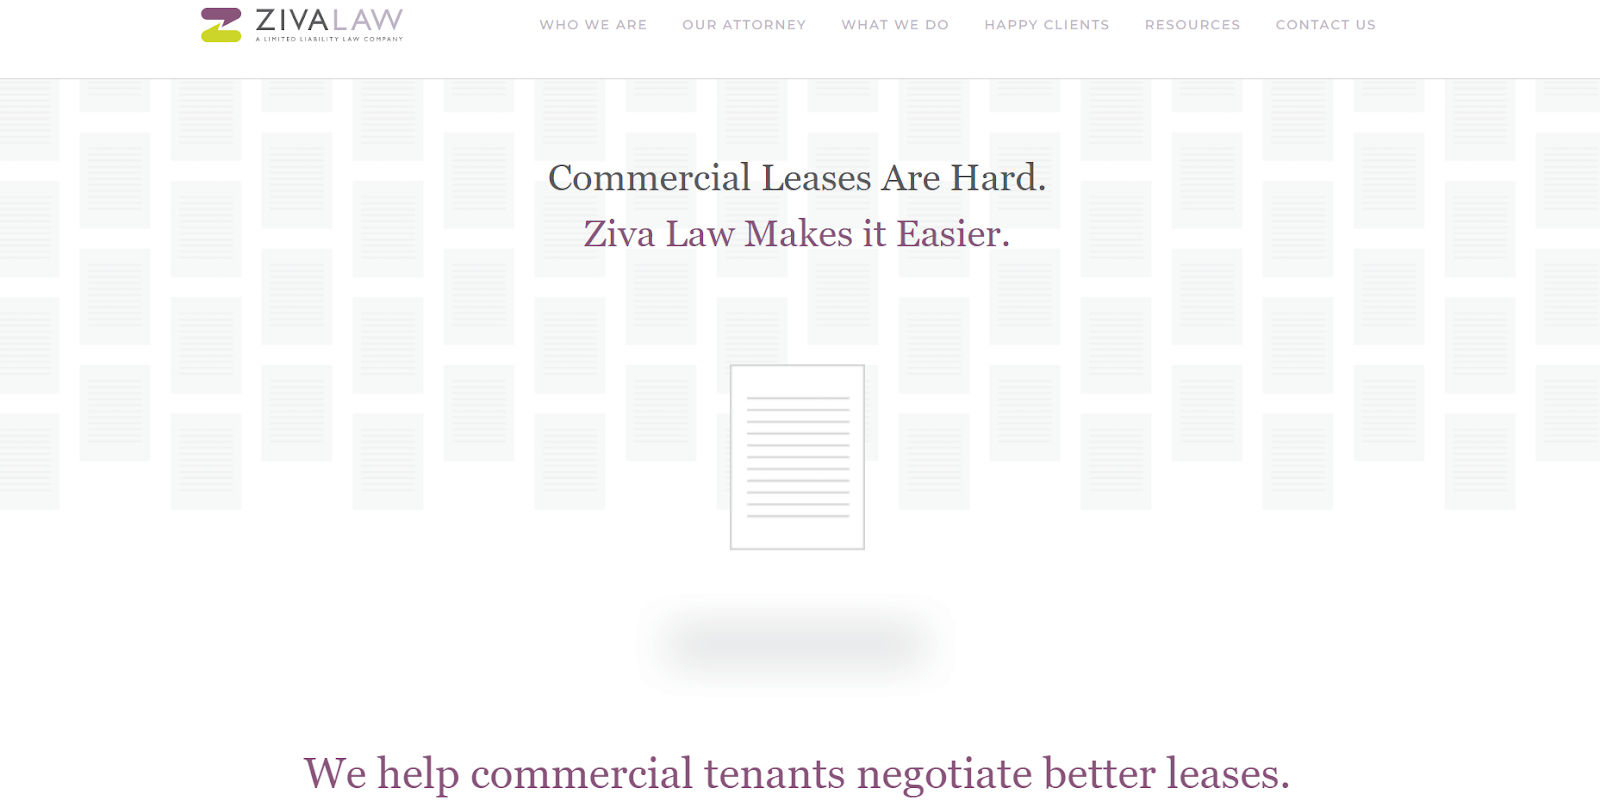 A legal provider's website for commercial tenants